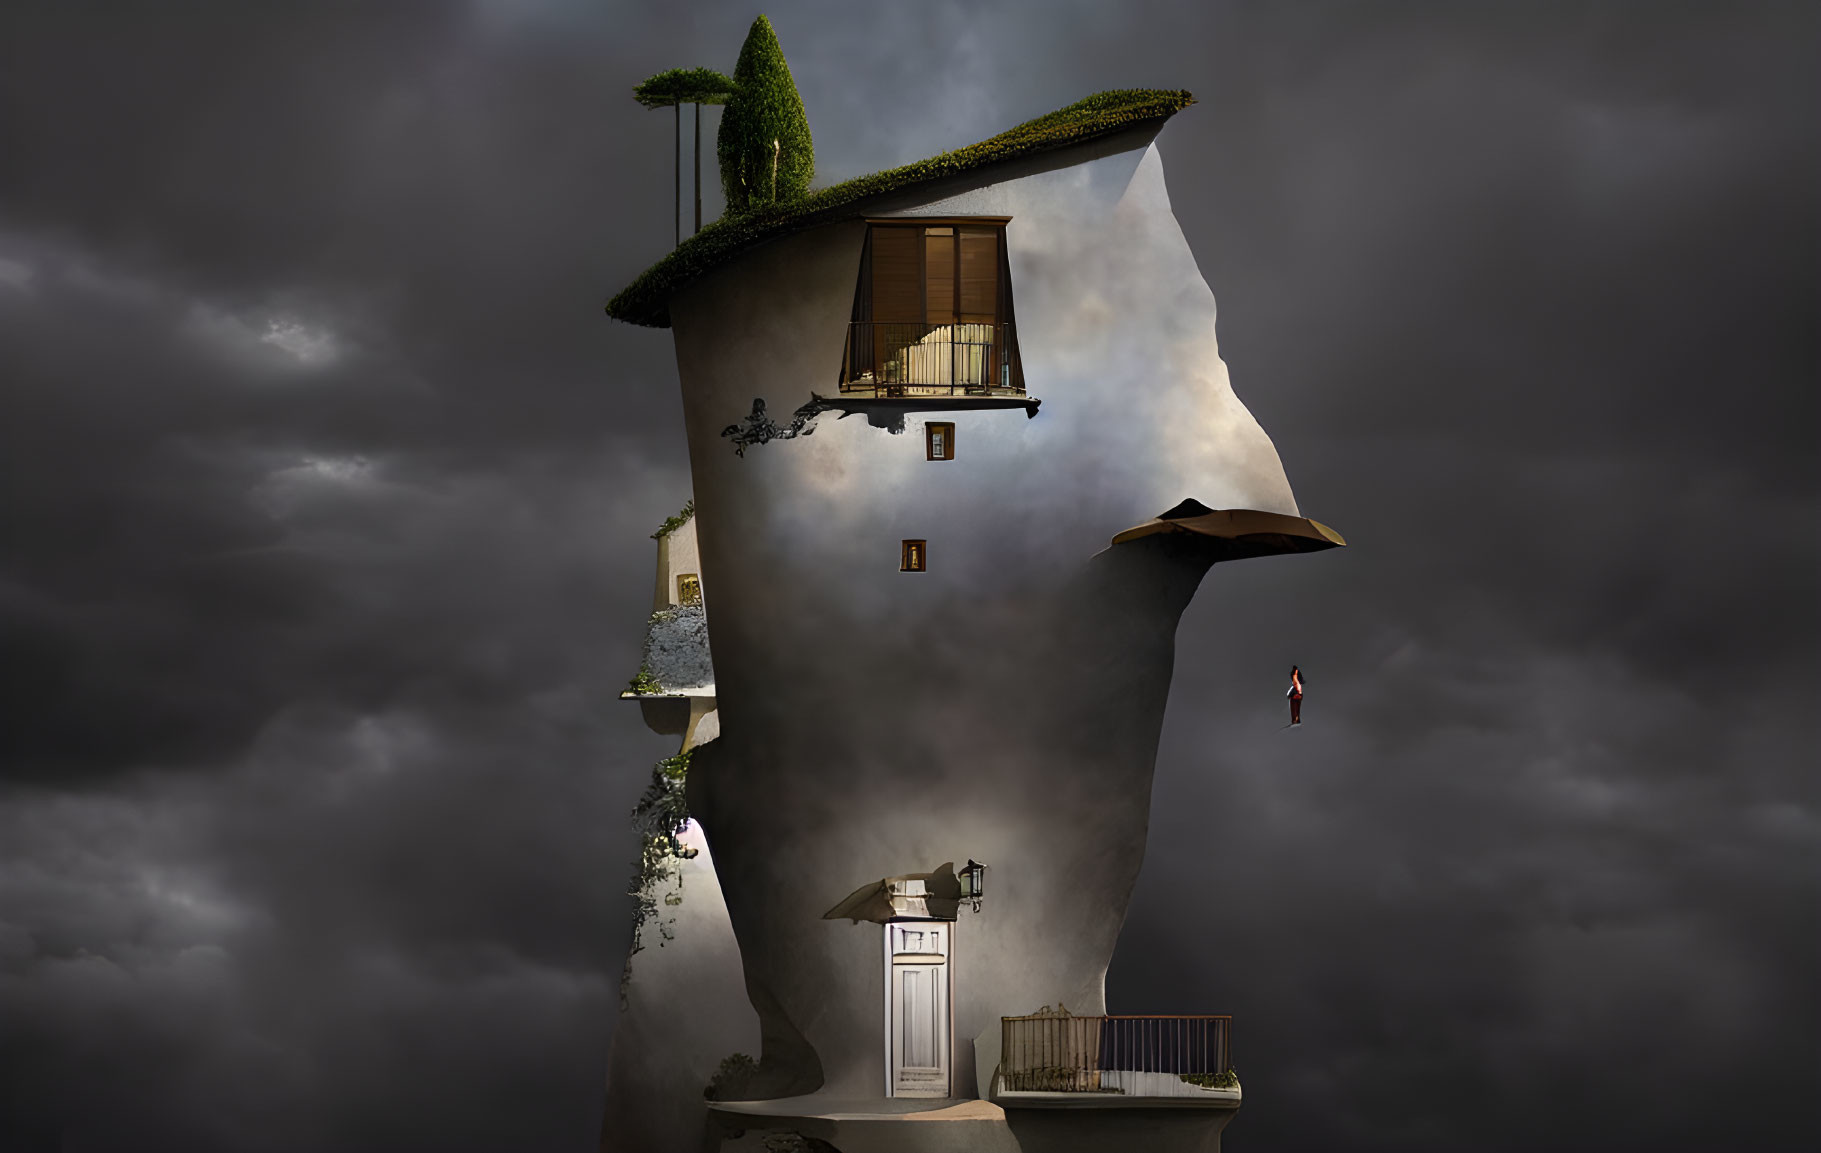 Surreal tower-like structure with rooftop garden in stormy sky.